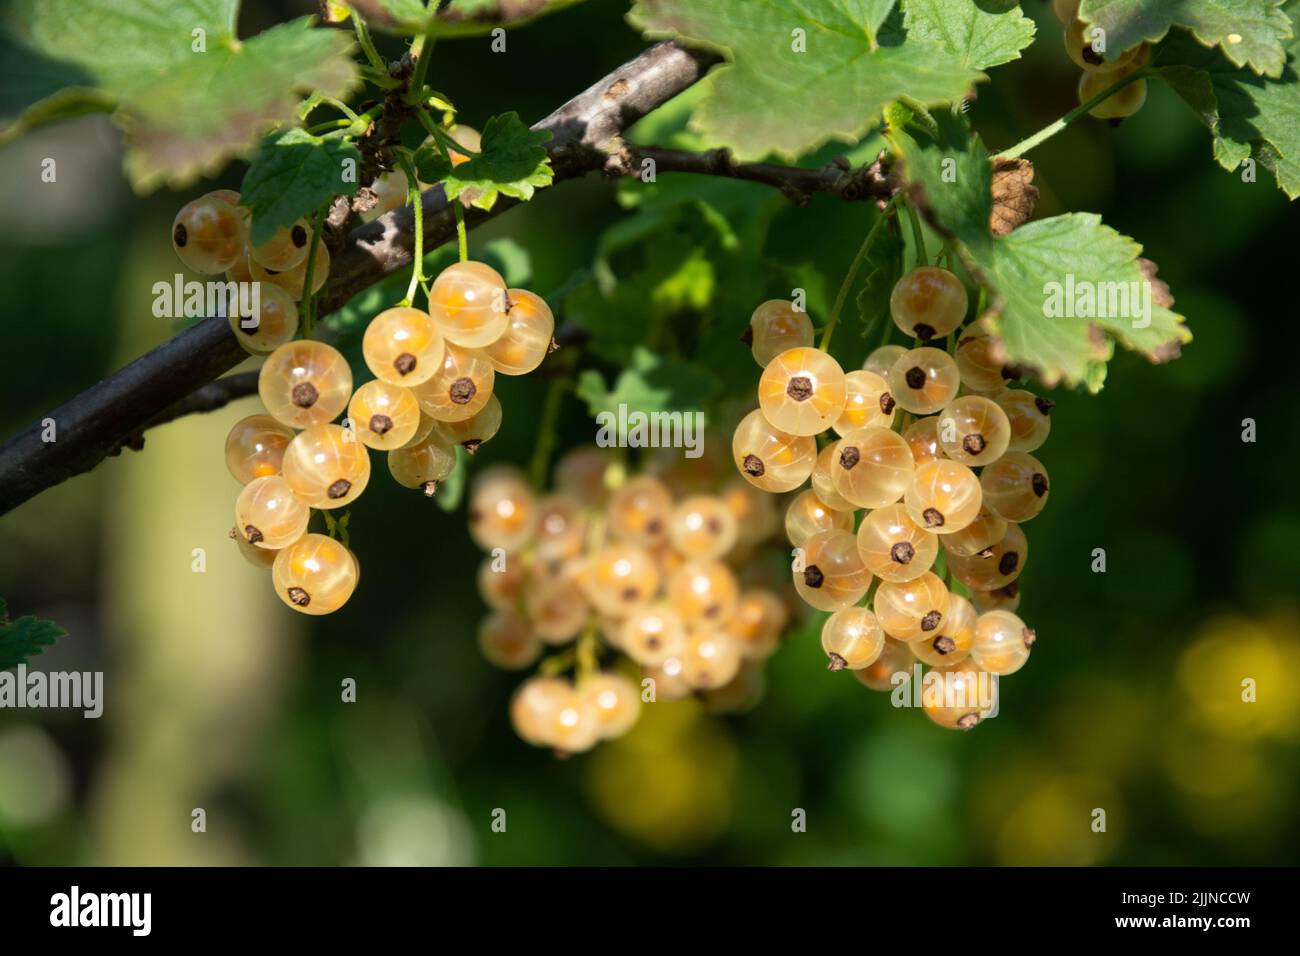 Branch of white currant with ripe sweet berries Stock Photo